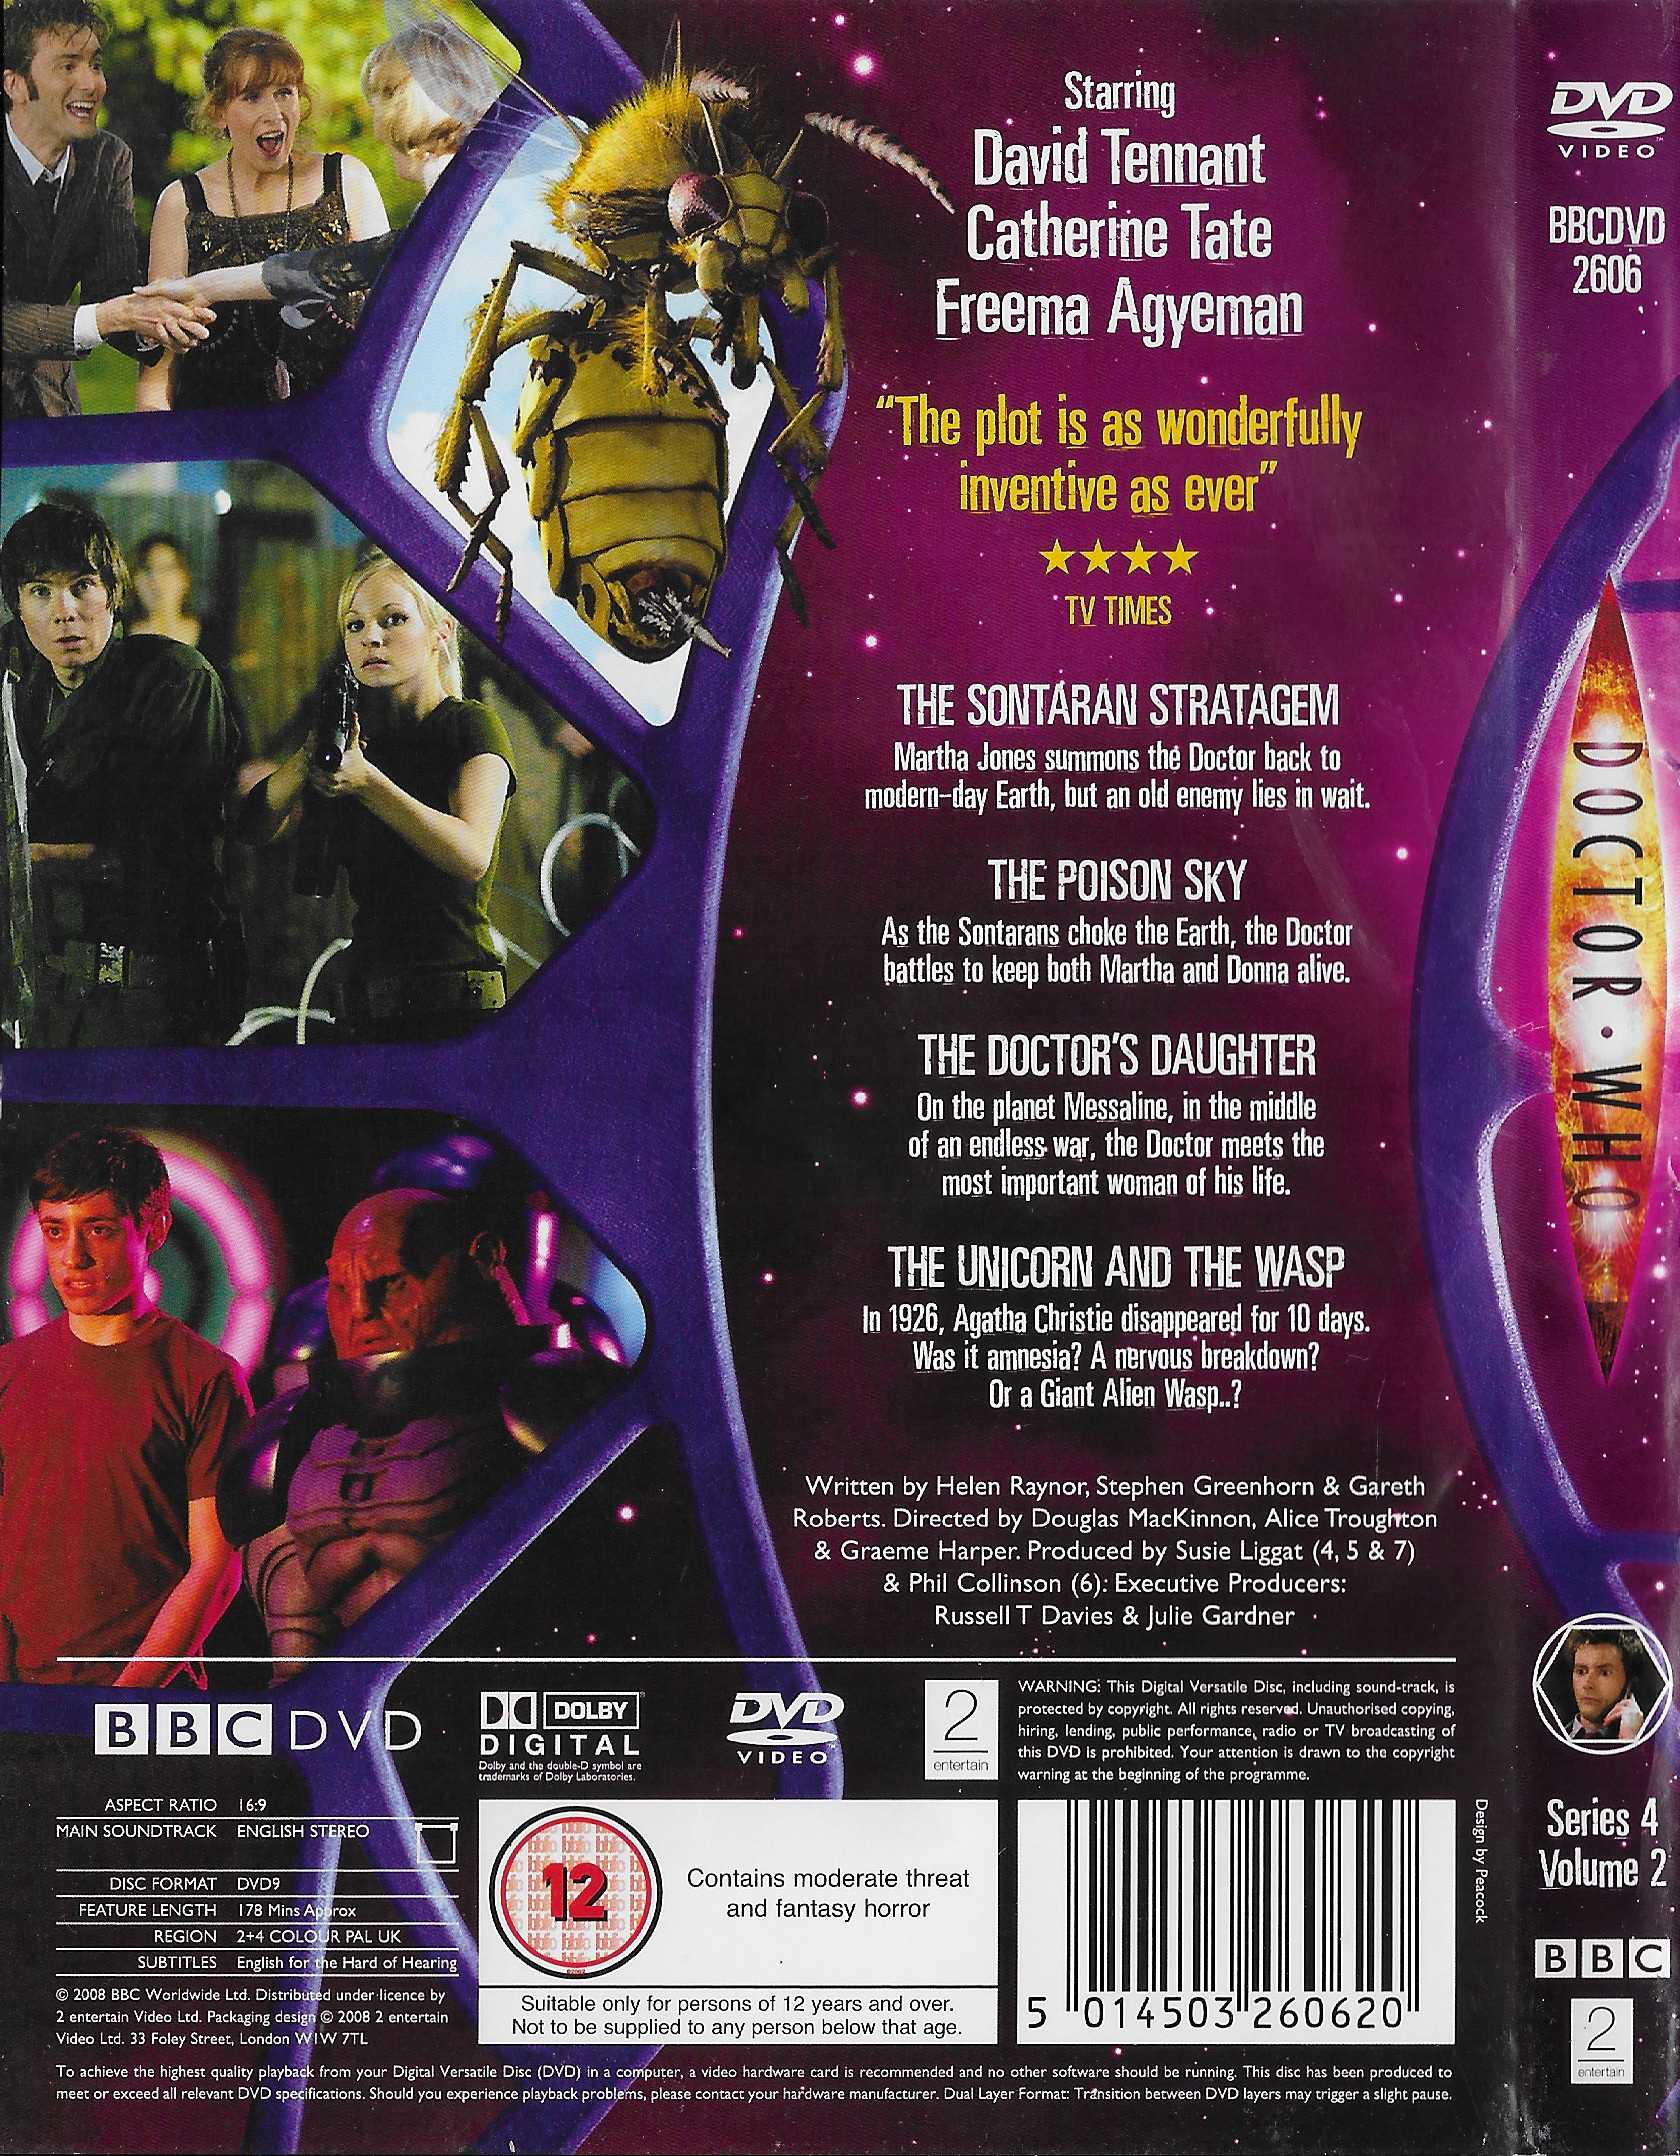 Picture of BBCDVD 2606 Doctor Who - Series 4, volume 2 by artist Helen Raynor / Stephen Greenhorn / Gareth Roberts from the BBC records and Tapes library